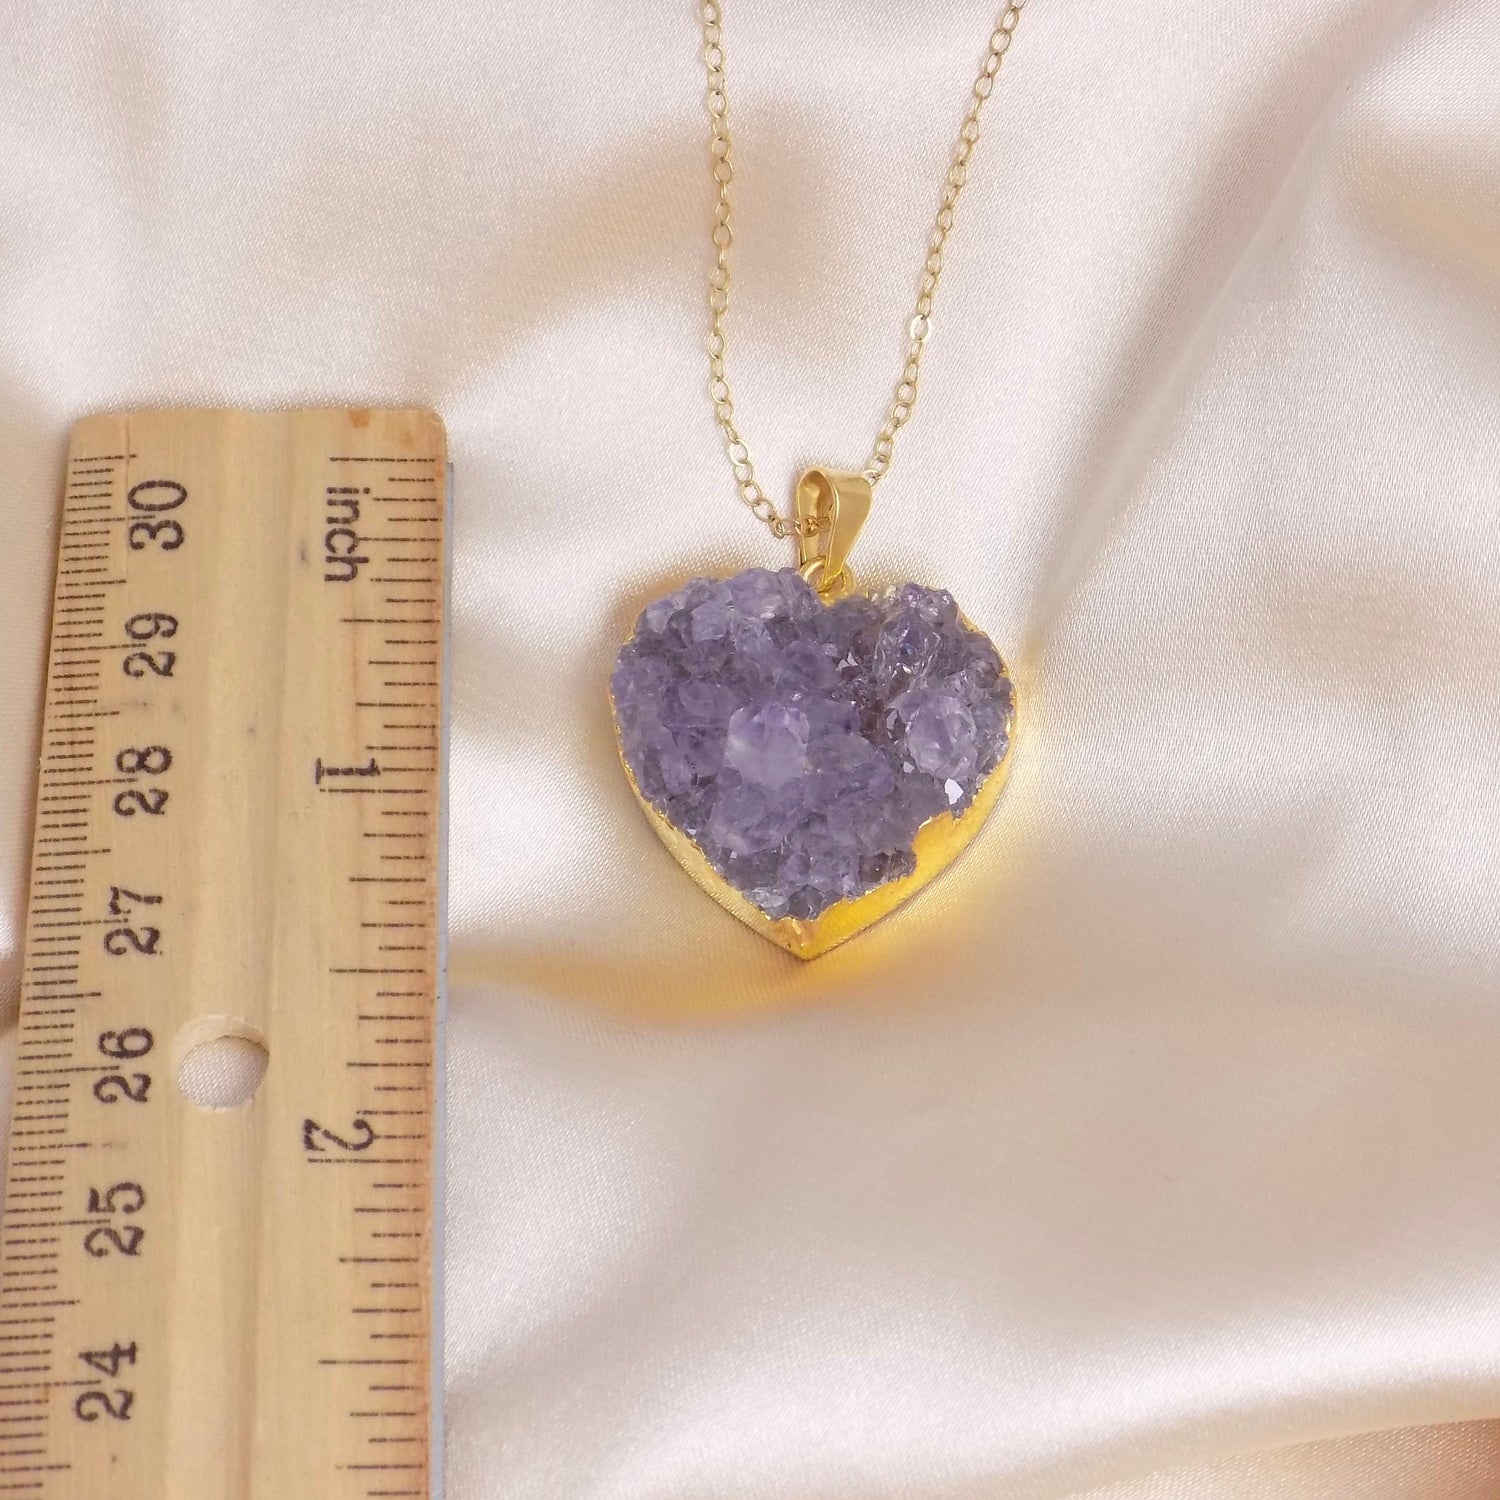 Gifts For Mom, Heart Necklace, Amethyst Necklace Gold, Mothers Day Gift, Wife Gift, Best Friend Gifts, G14-163